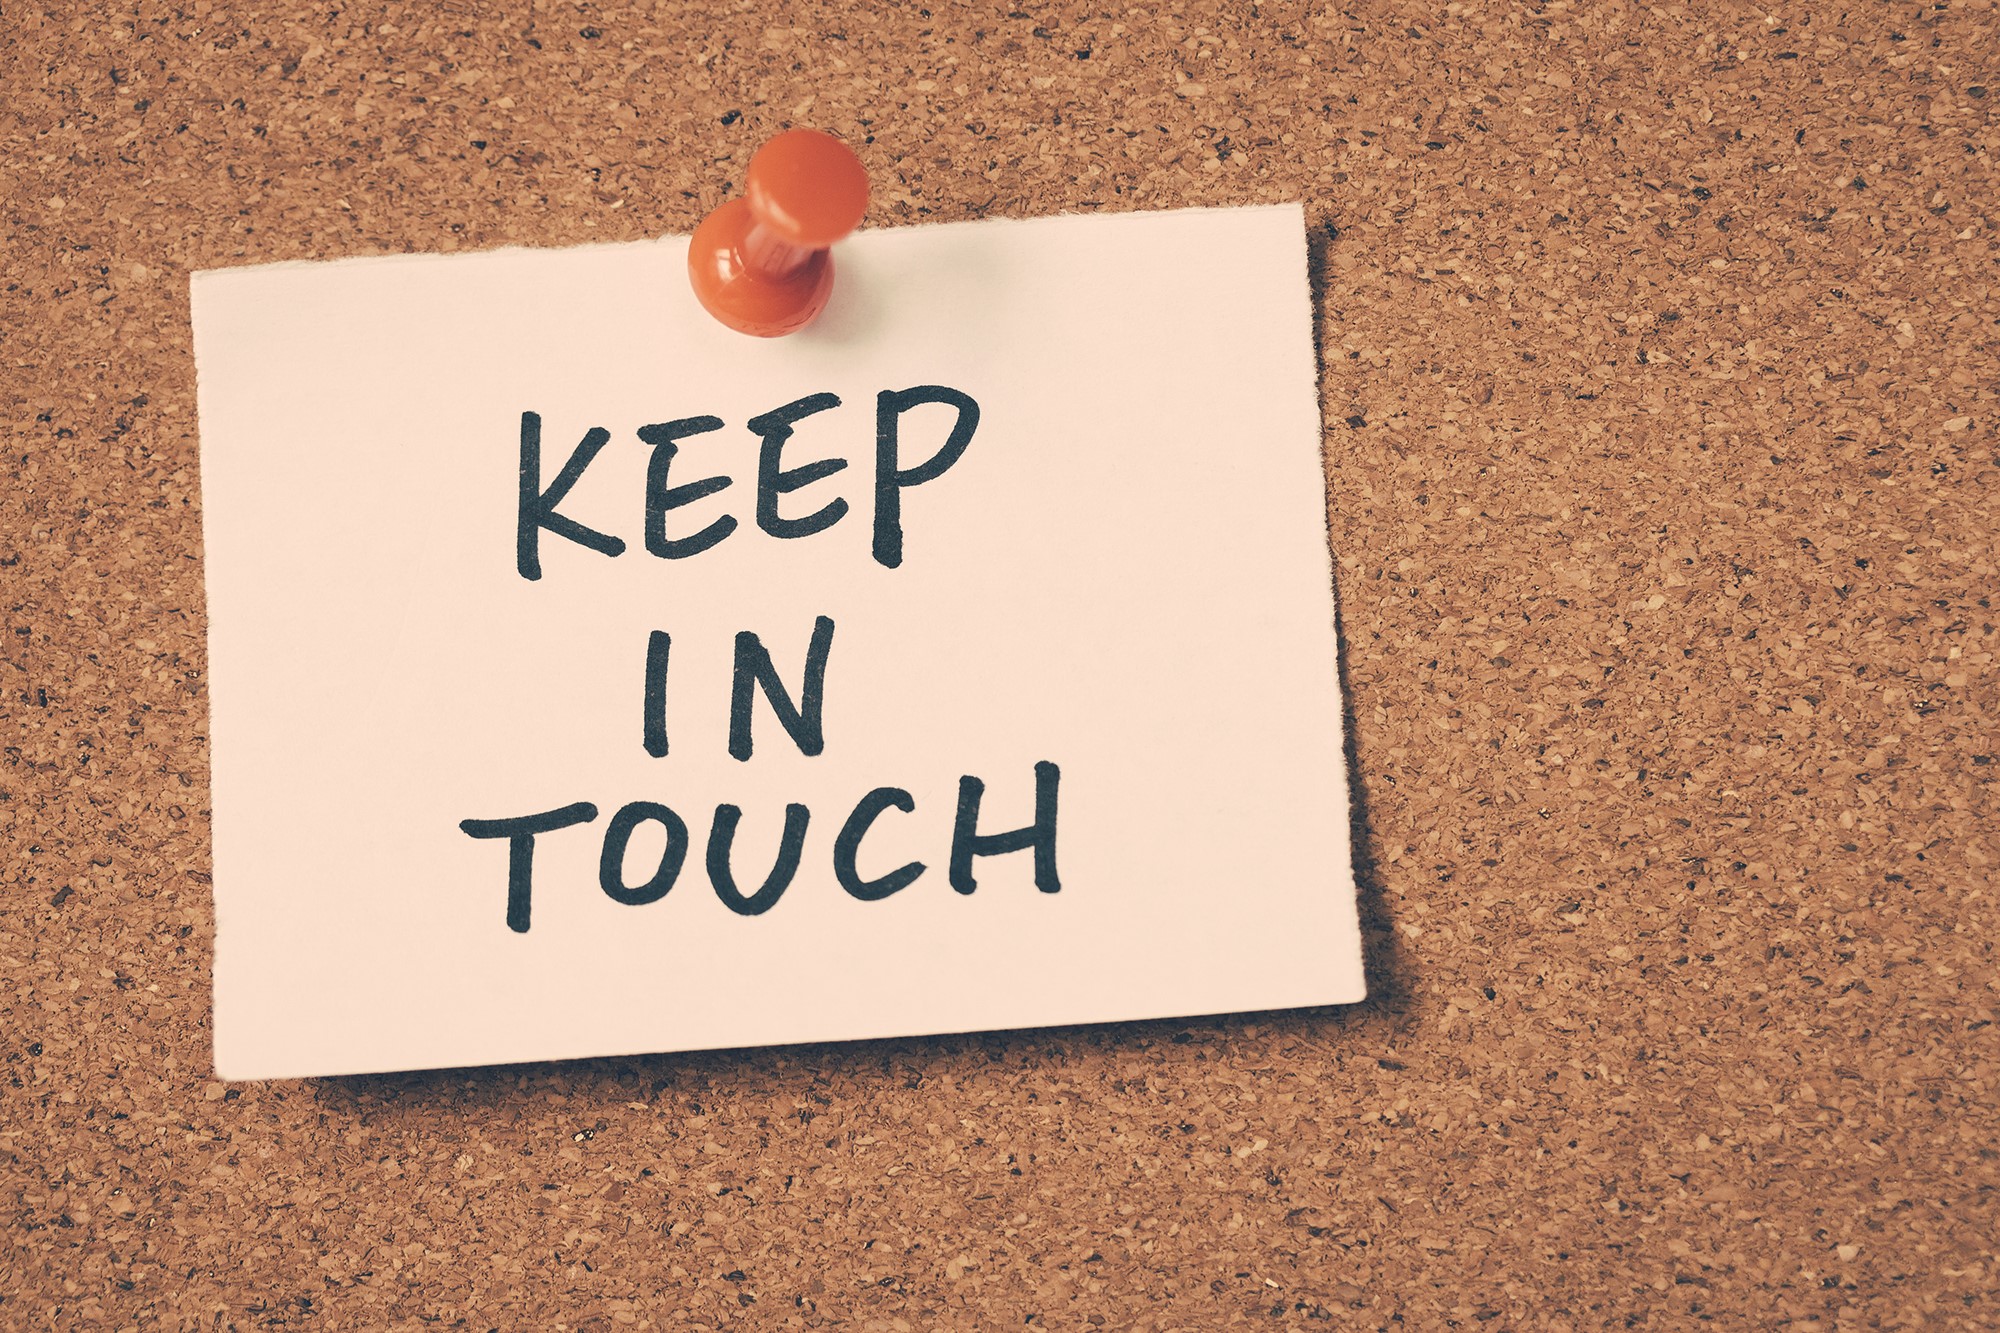 A photo of a sign that reads "Keep in Touch" pinned to a corkboard